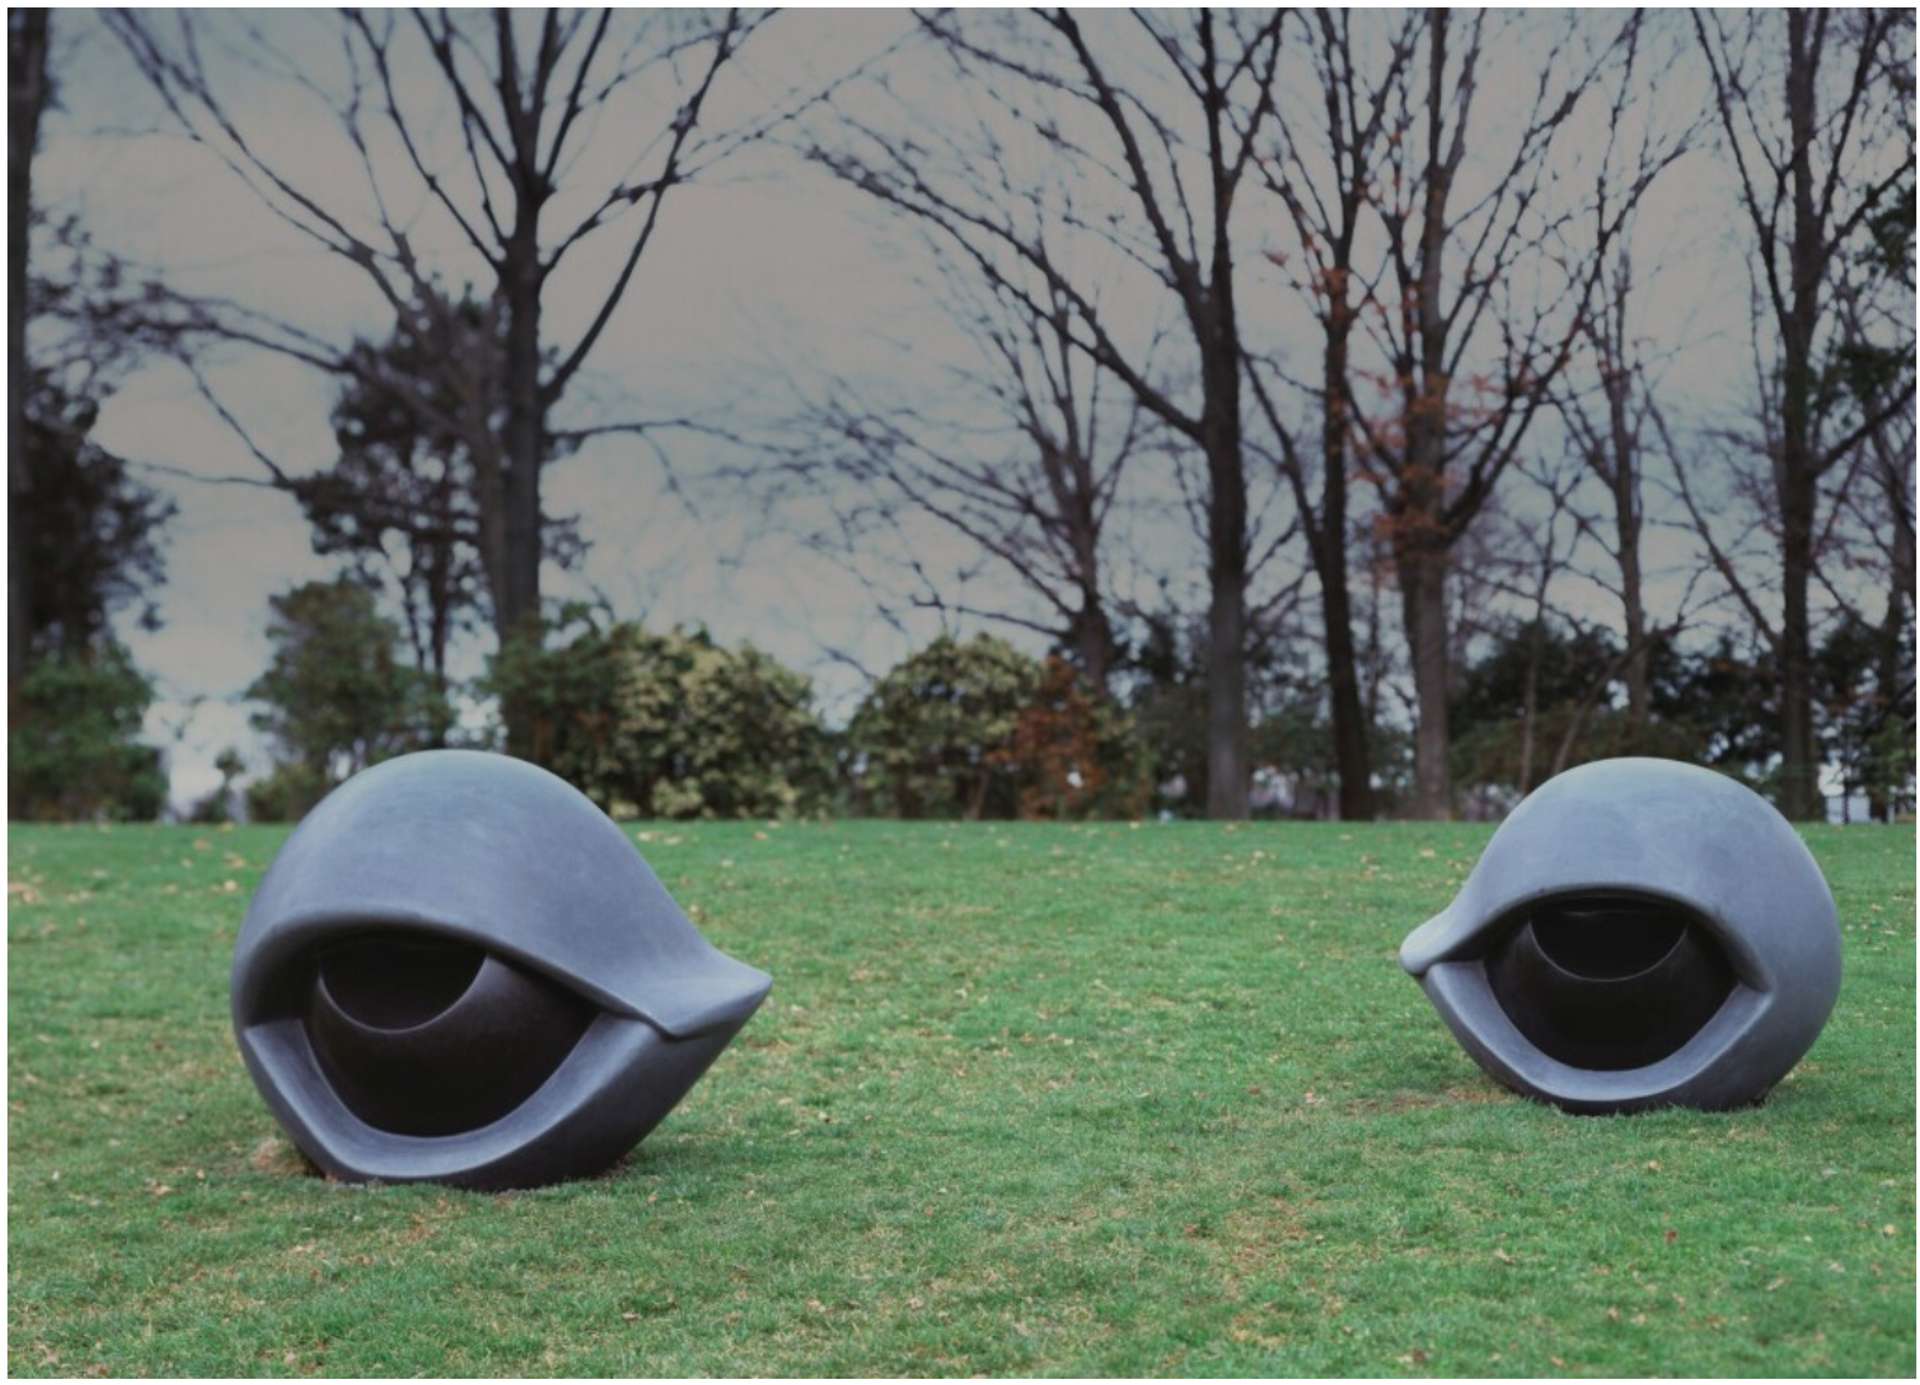 Two large outdoor sculptures placed in a grassy park, slightly apart from each other. The sculptures have rounded shapes resembling eyeballs, featuring the corneas, pupils, and drooping eyelids.